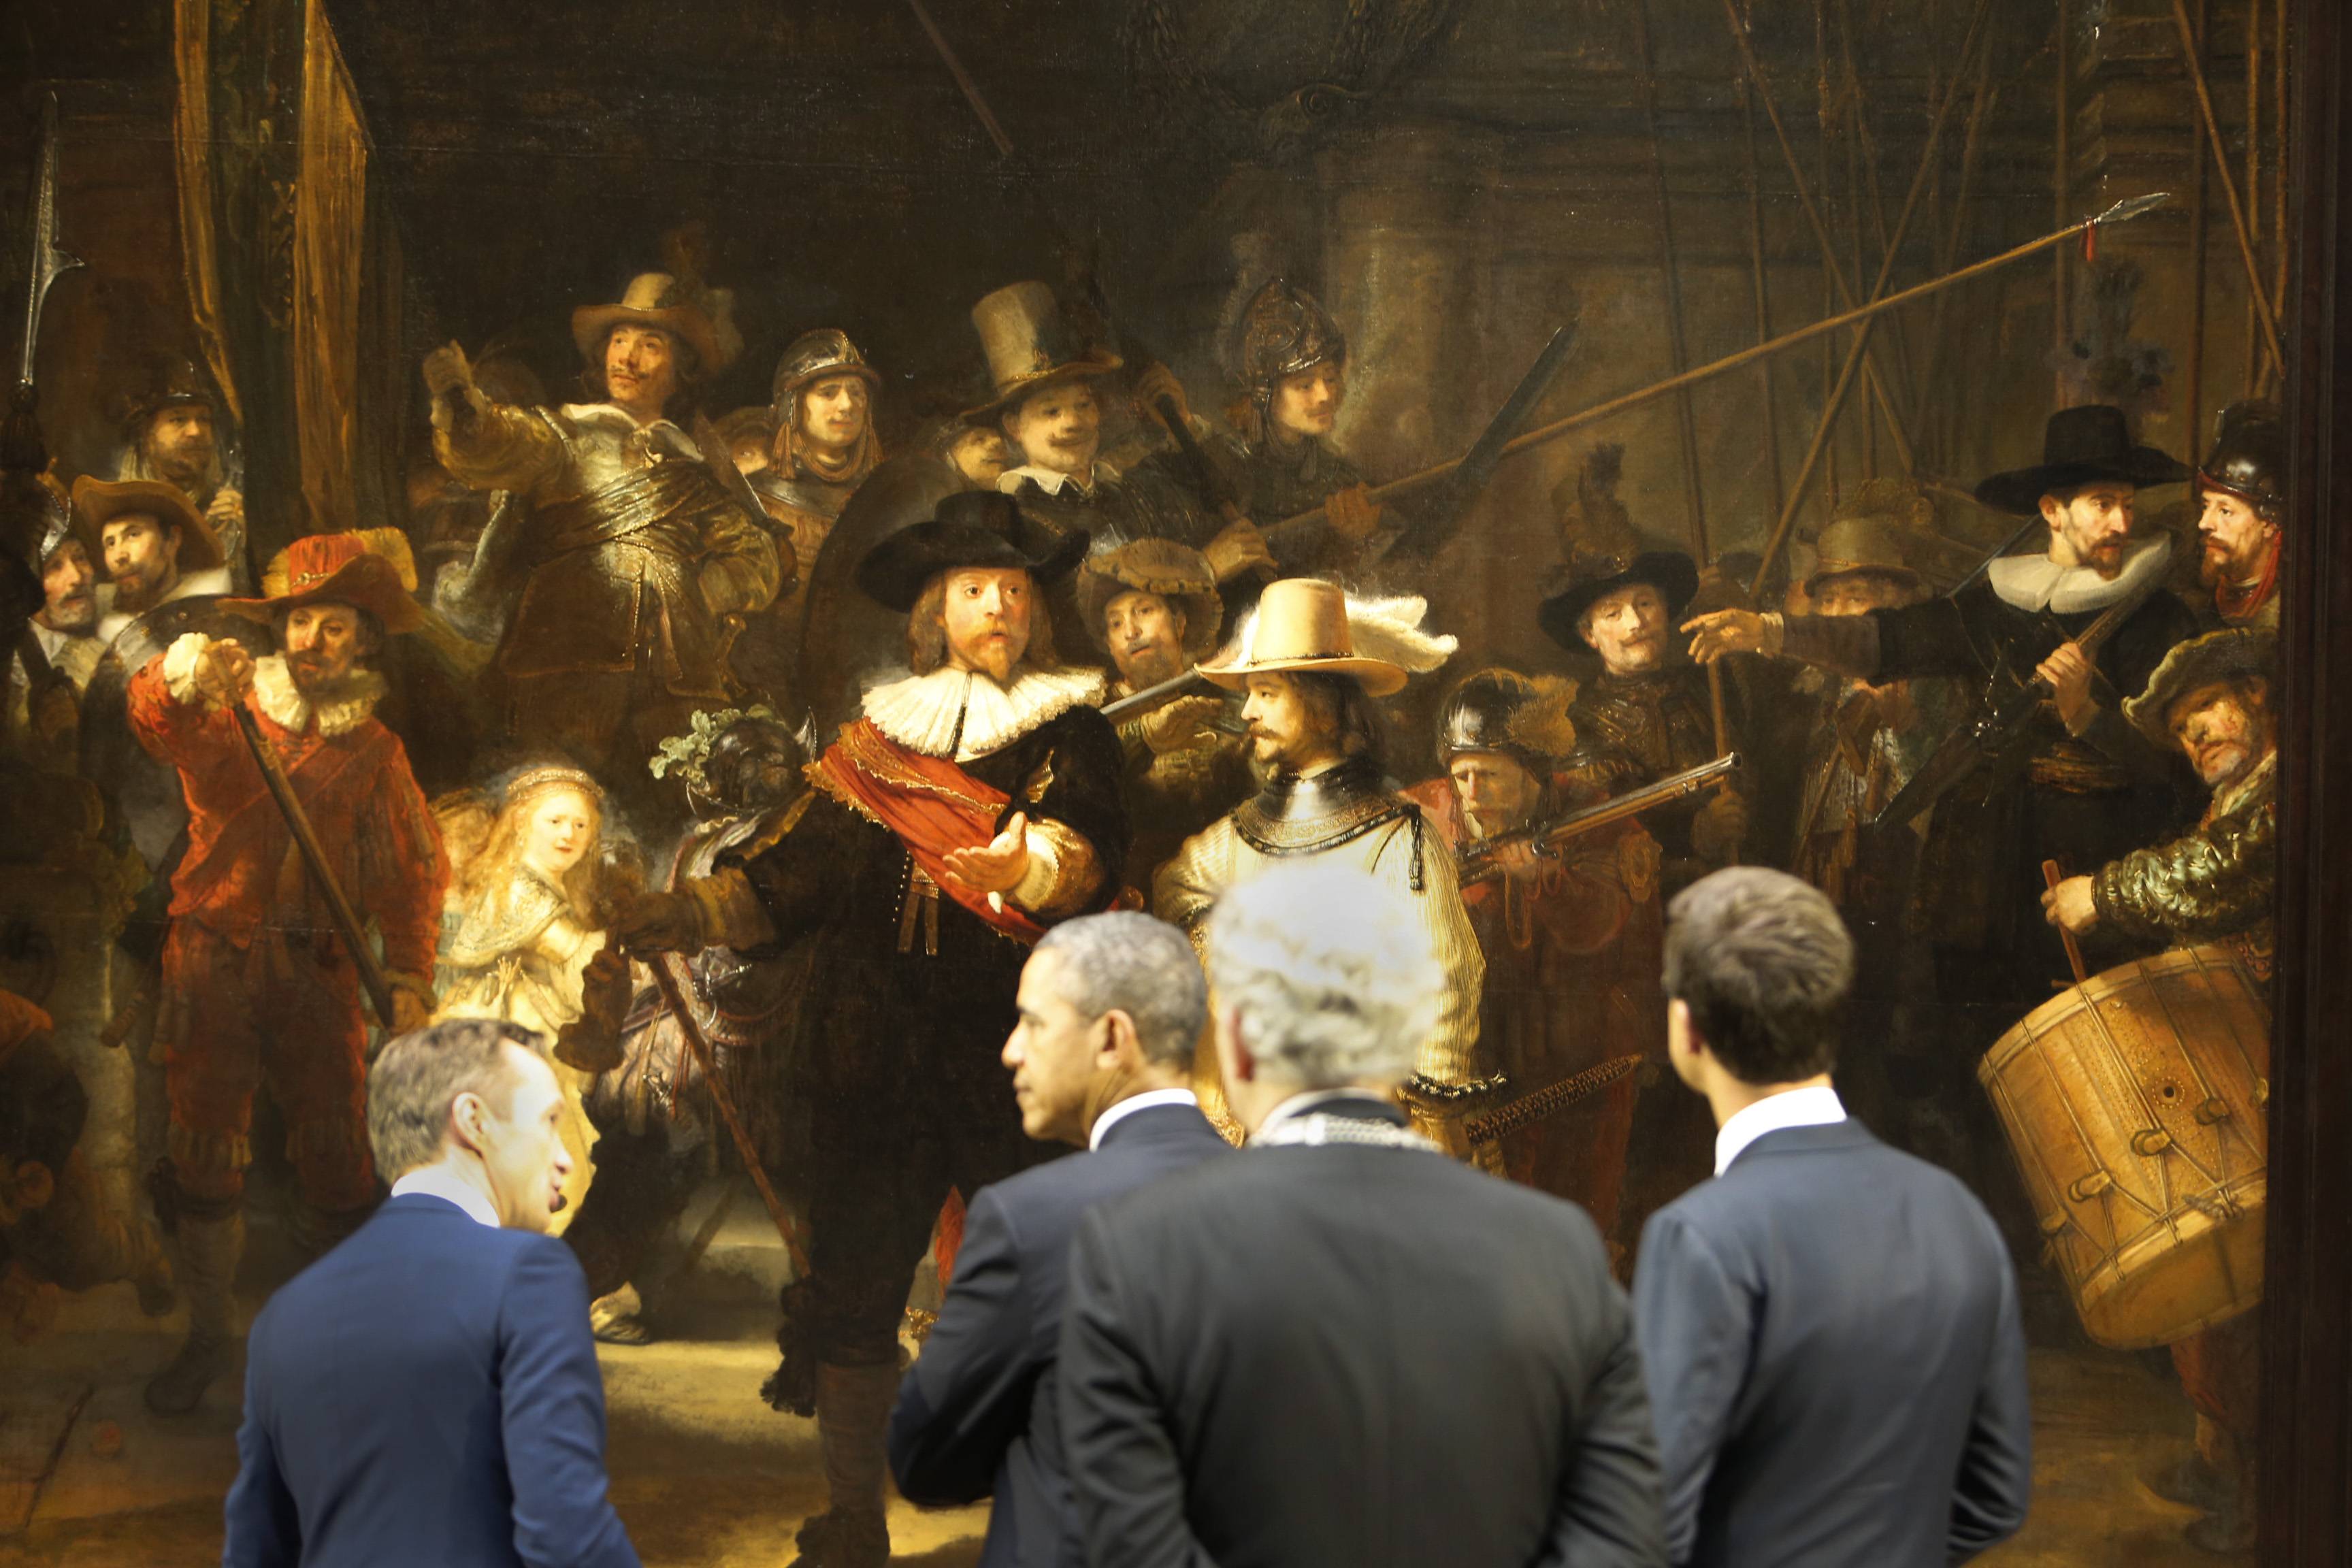 President Obama and Prime Minister Rutte of the Netherlands looking at Rembrandt's Nightwatch.